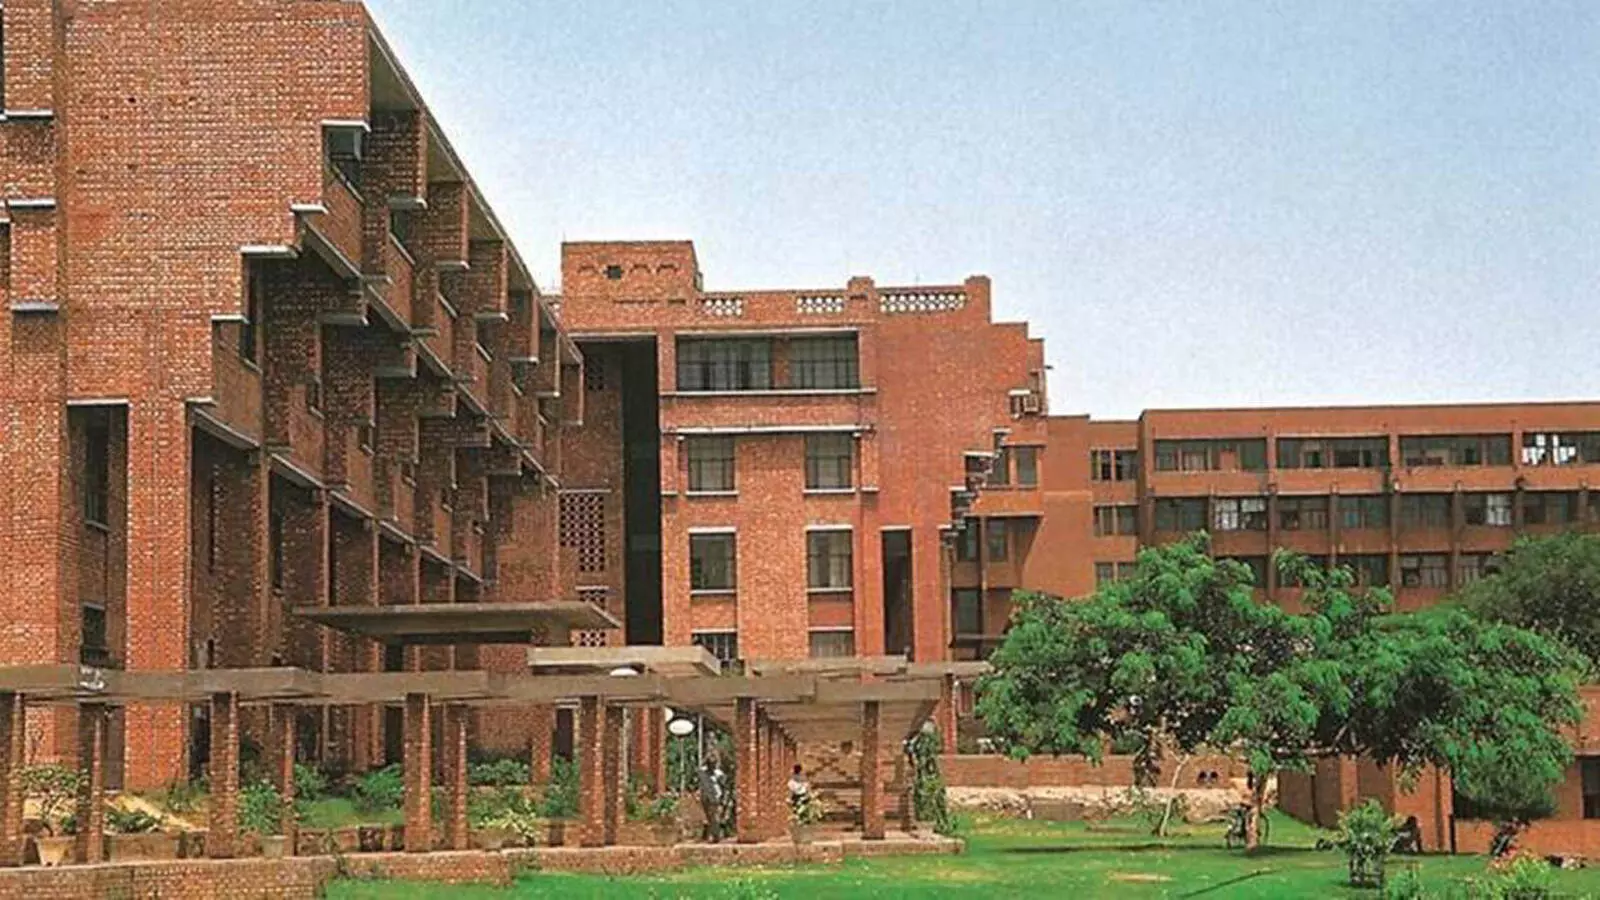 JNU issues fresh guidelines for students, staff as COVID-19 cases surge in Delhi